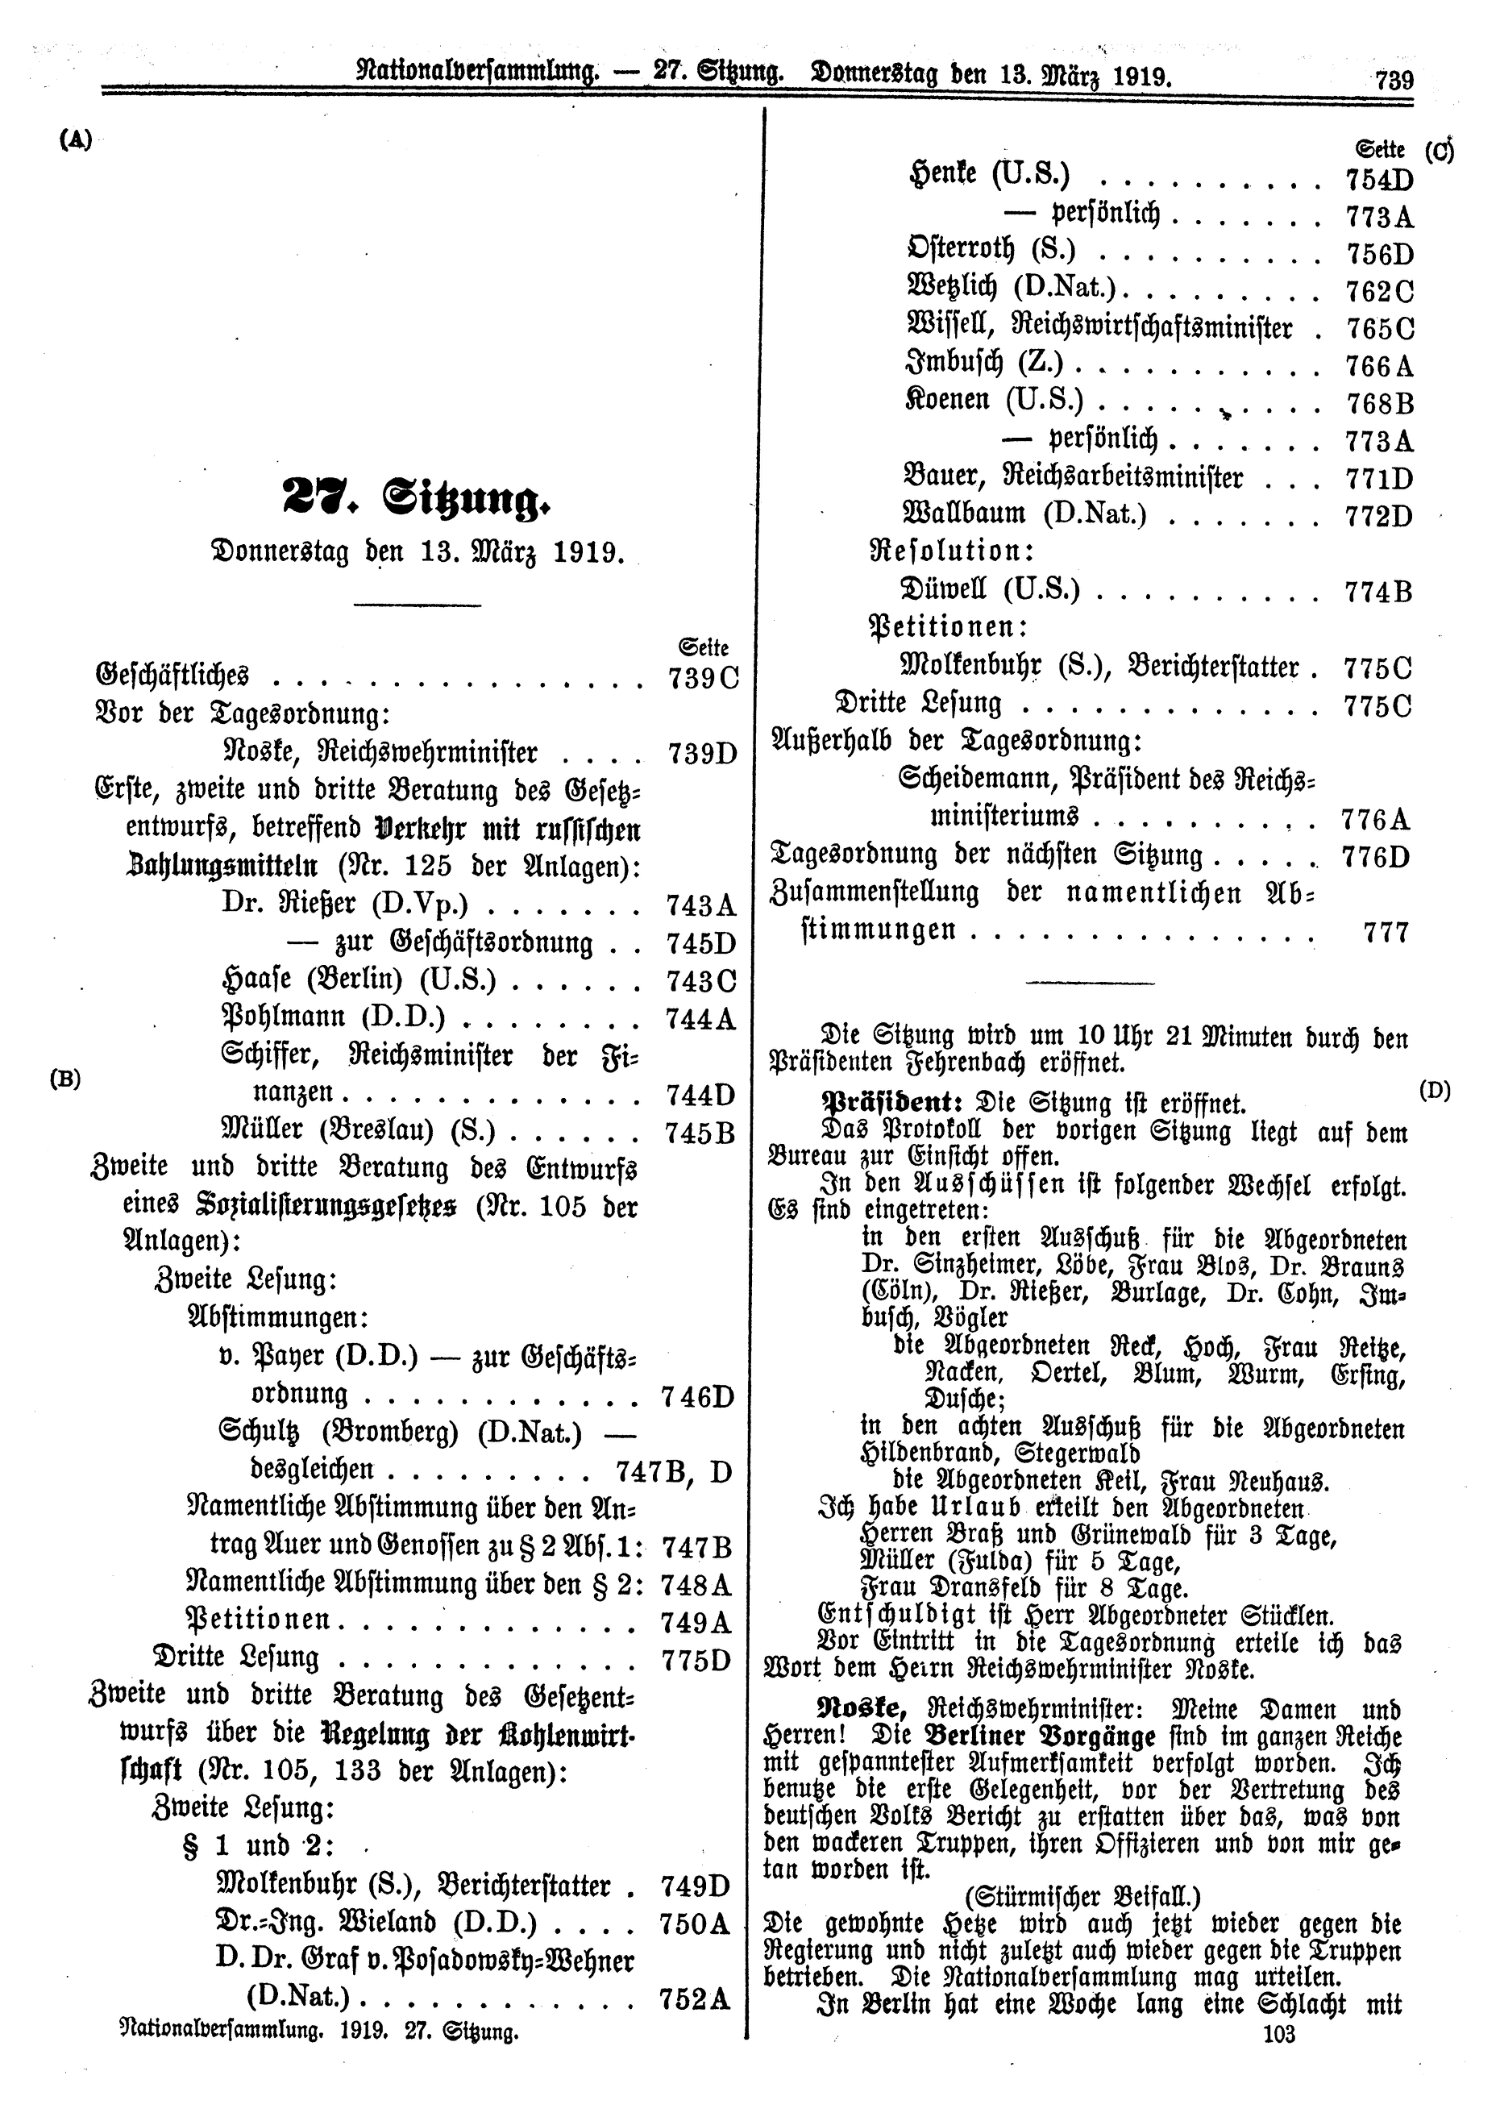 Scan of page 739